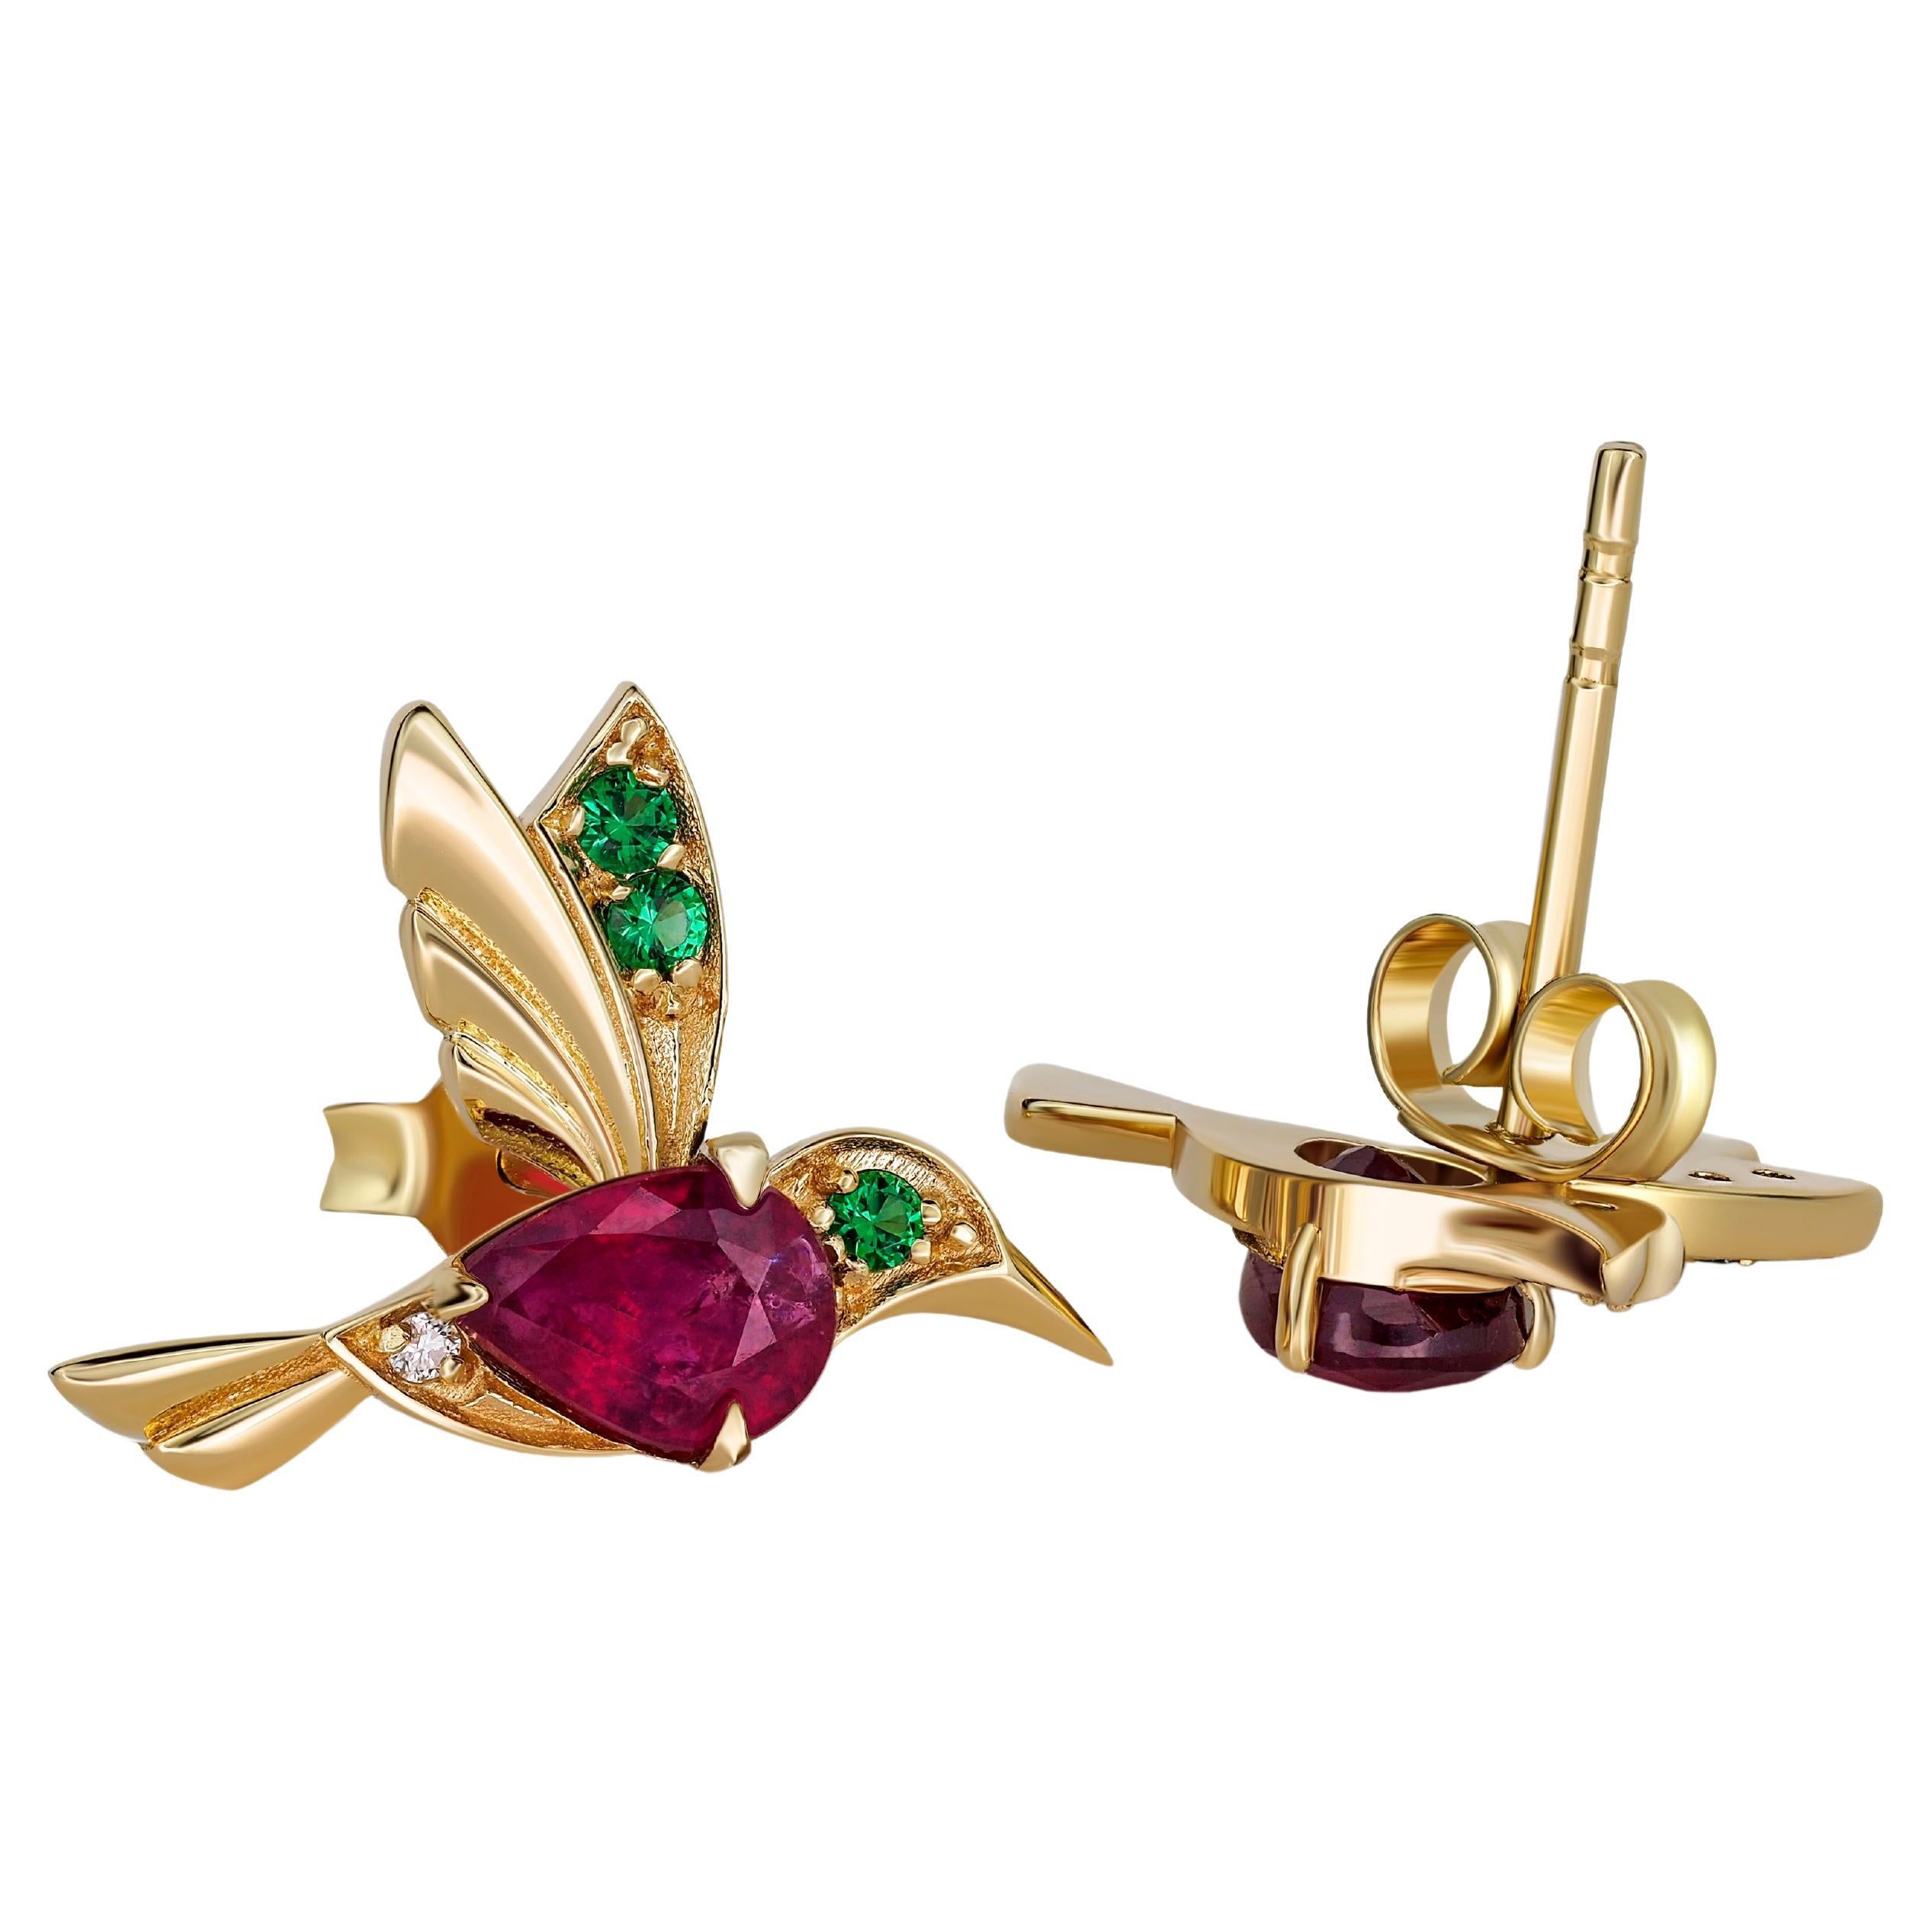 14k Gold Hummingbird Earings Studs with Rubies, Bird Stud Earrings with Gems ! For Sale